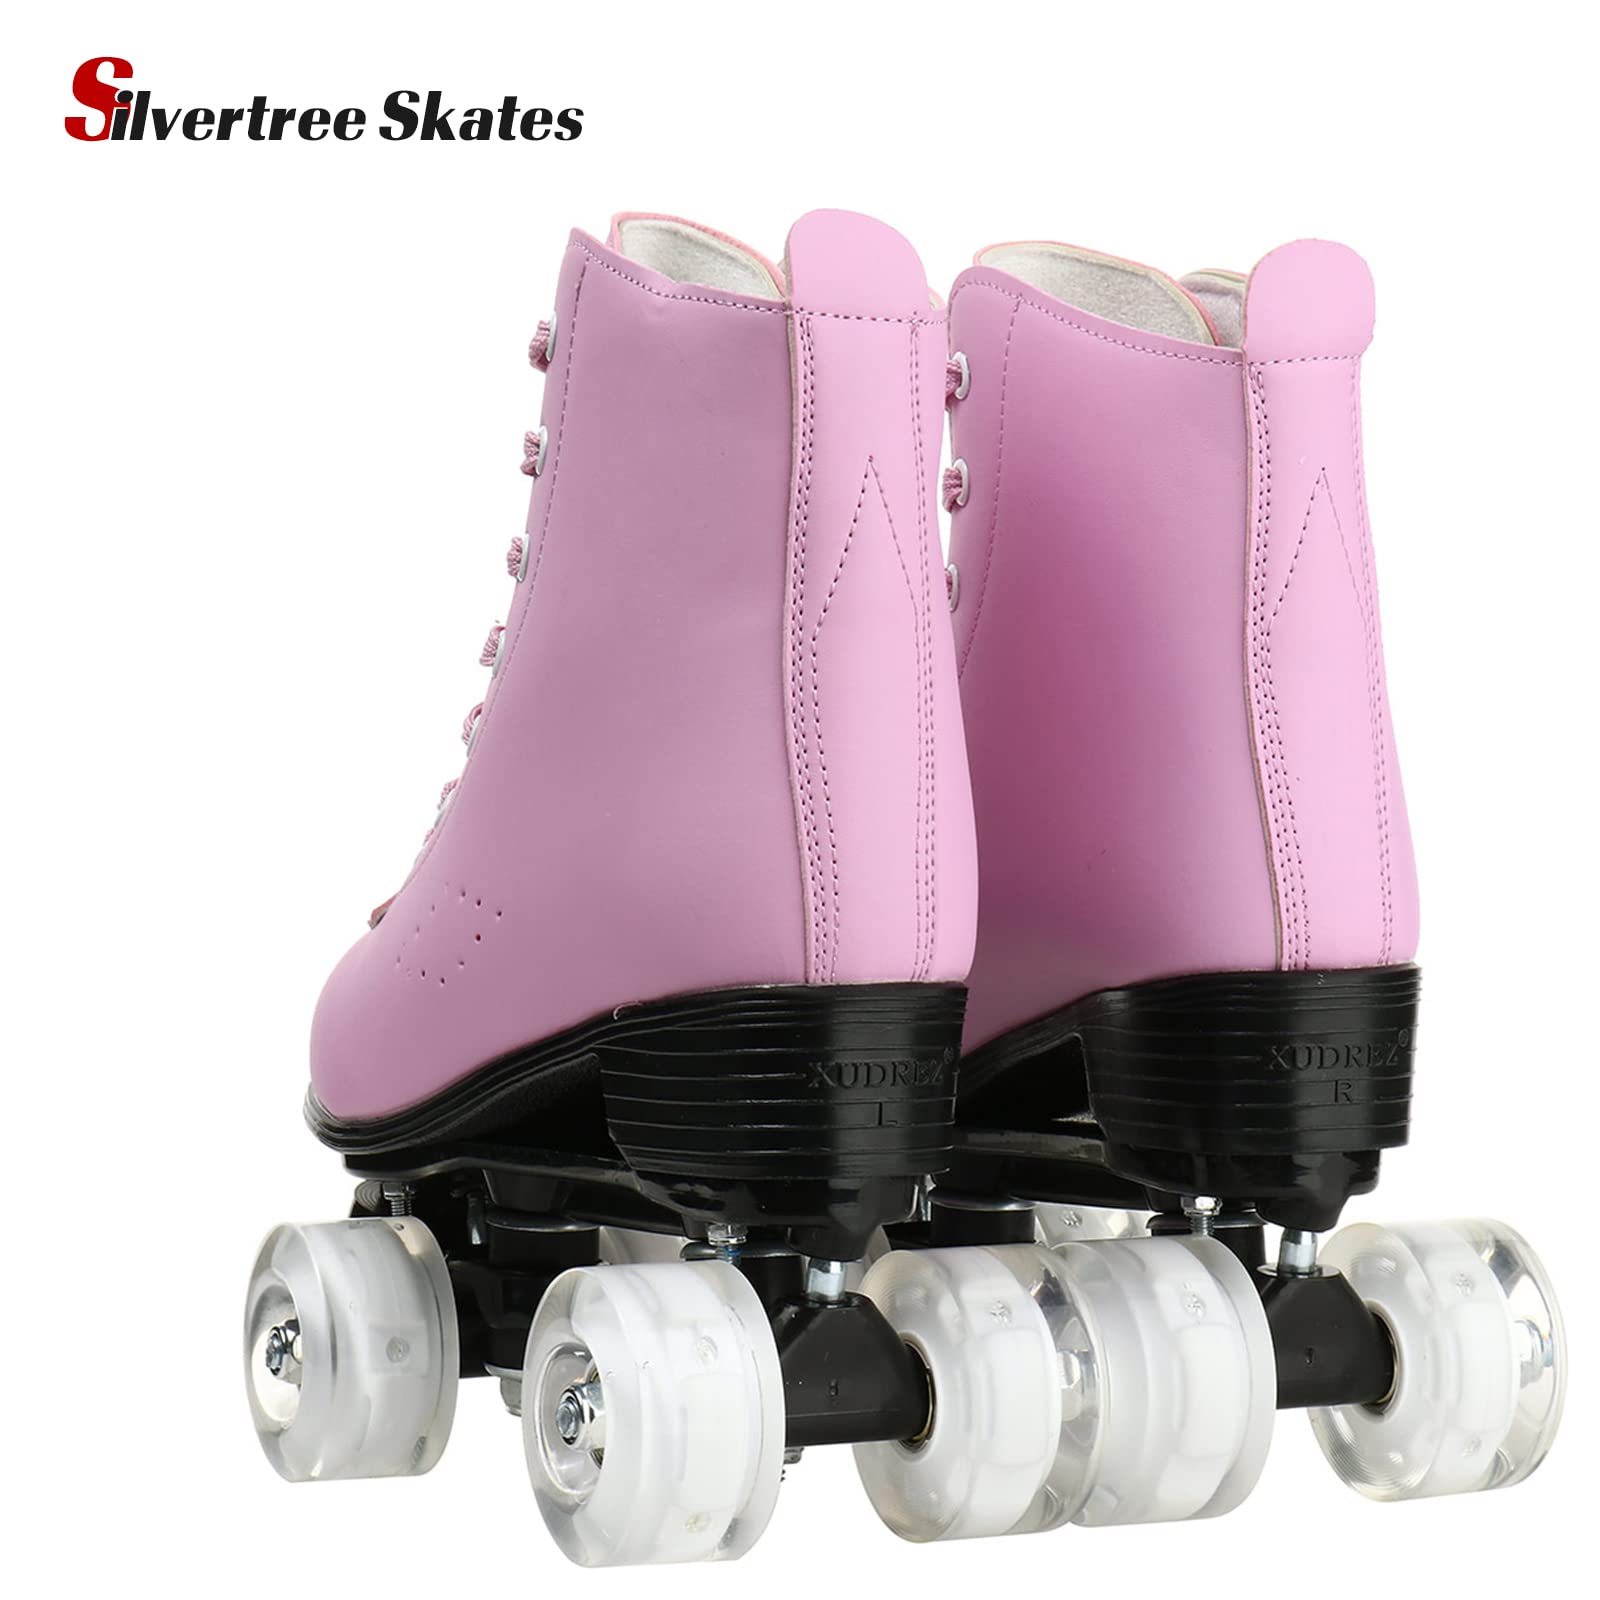 Women's Roller Skates PU Leather High-top Roller Skates Four-Wheel Roller Skates Shiny Roller Skates with Carry Bag for Girls (Pink Flash Wheel,US:9)